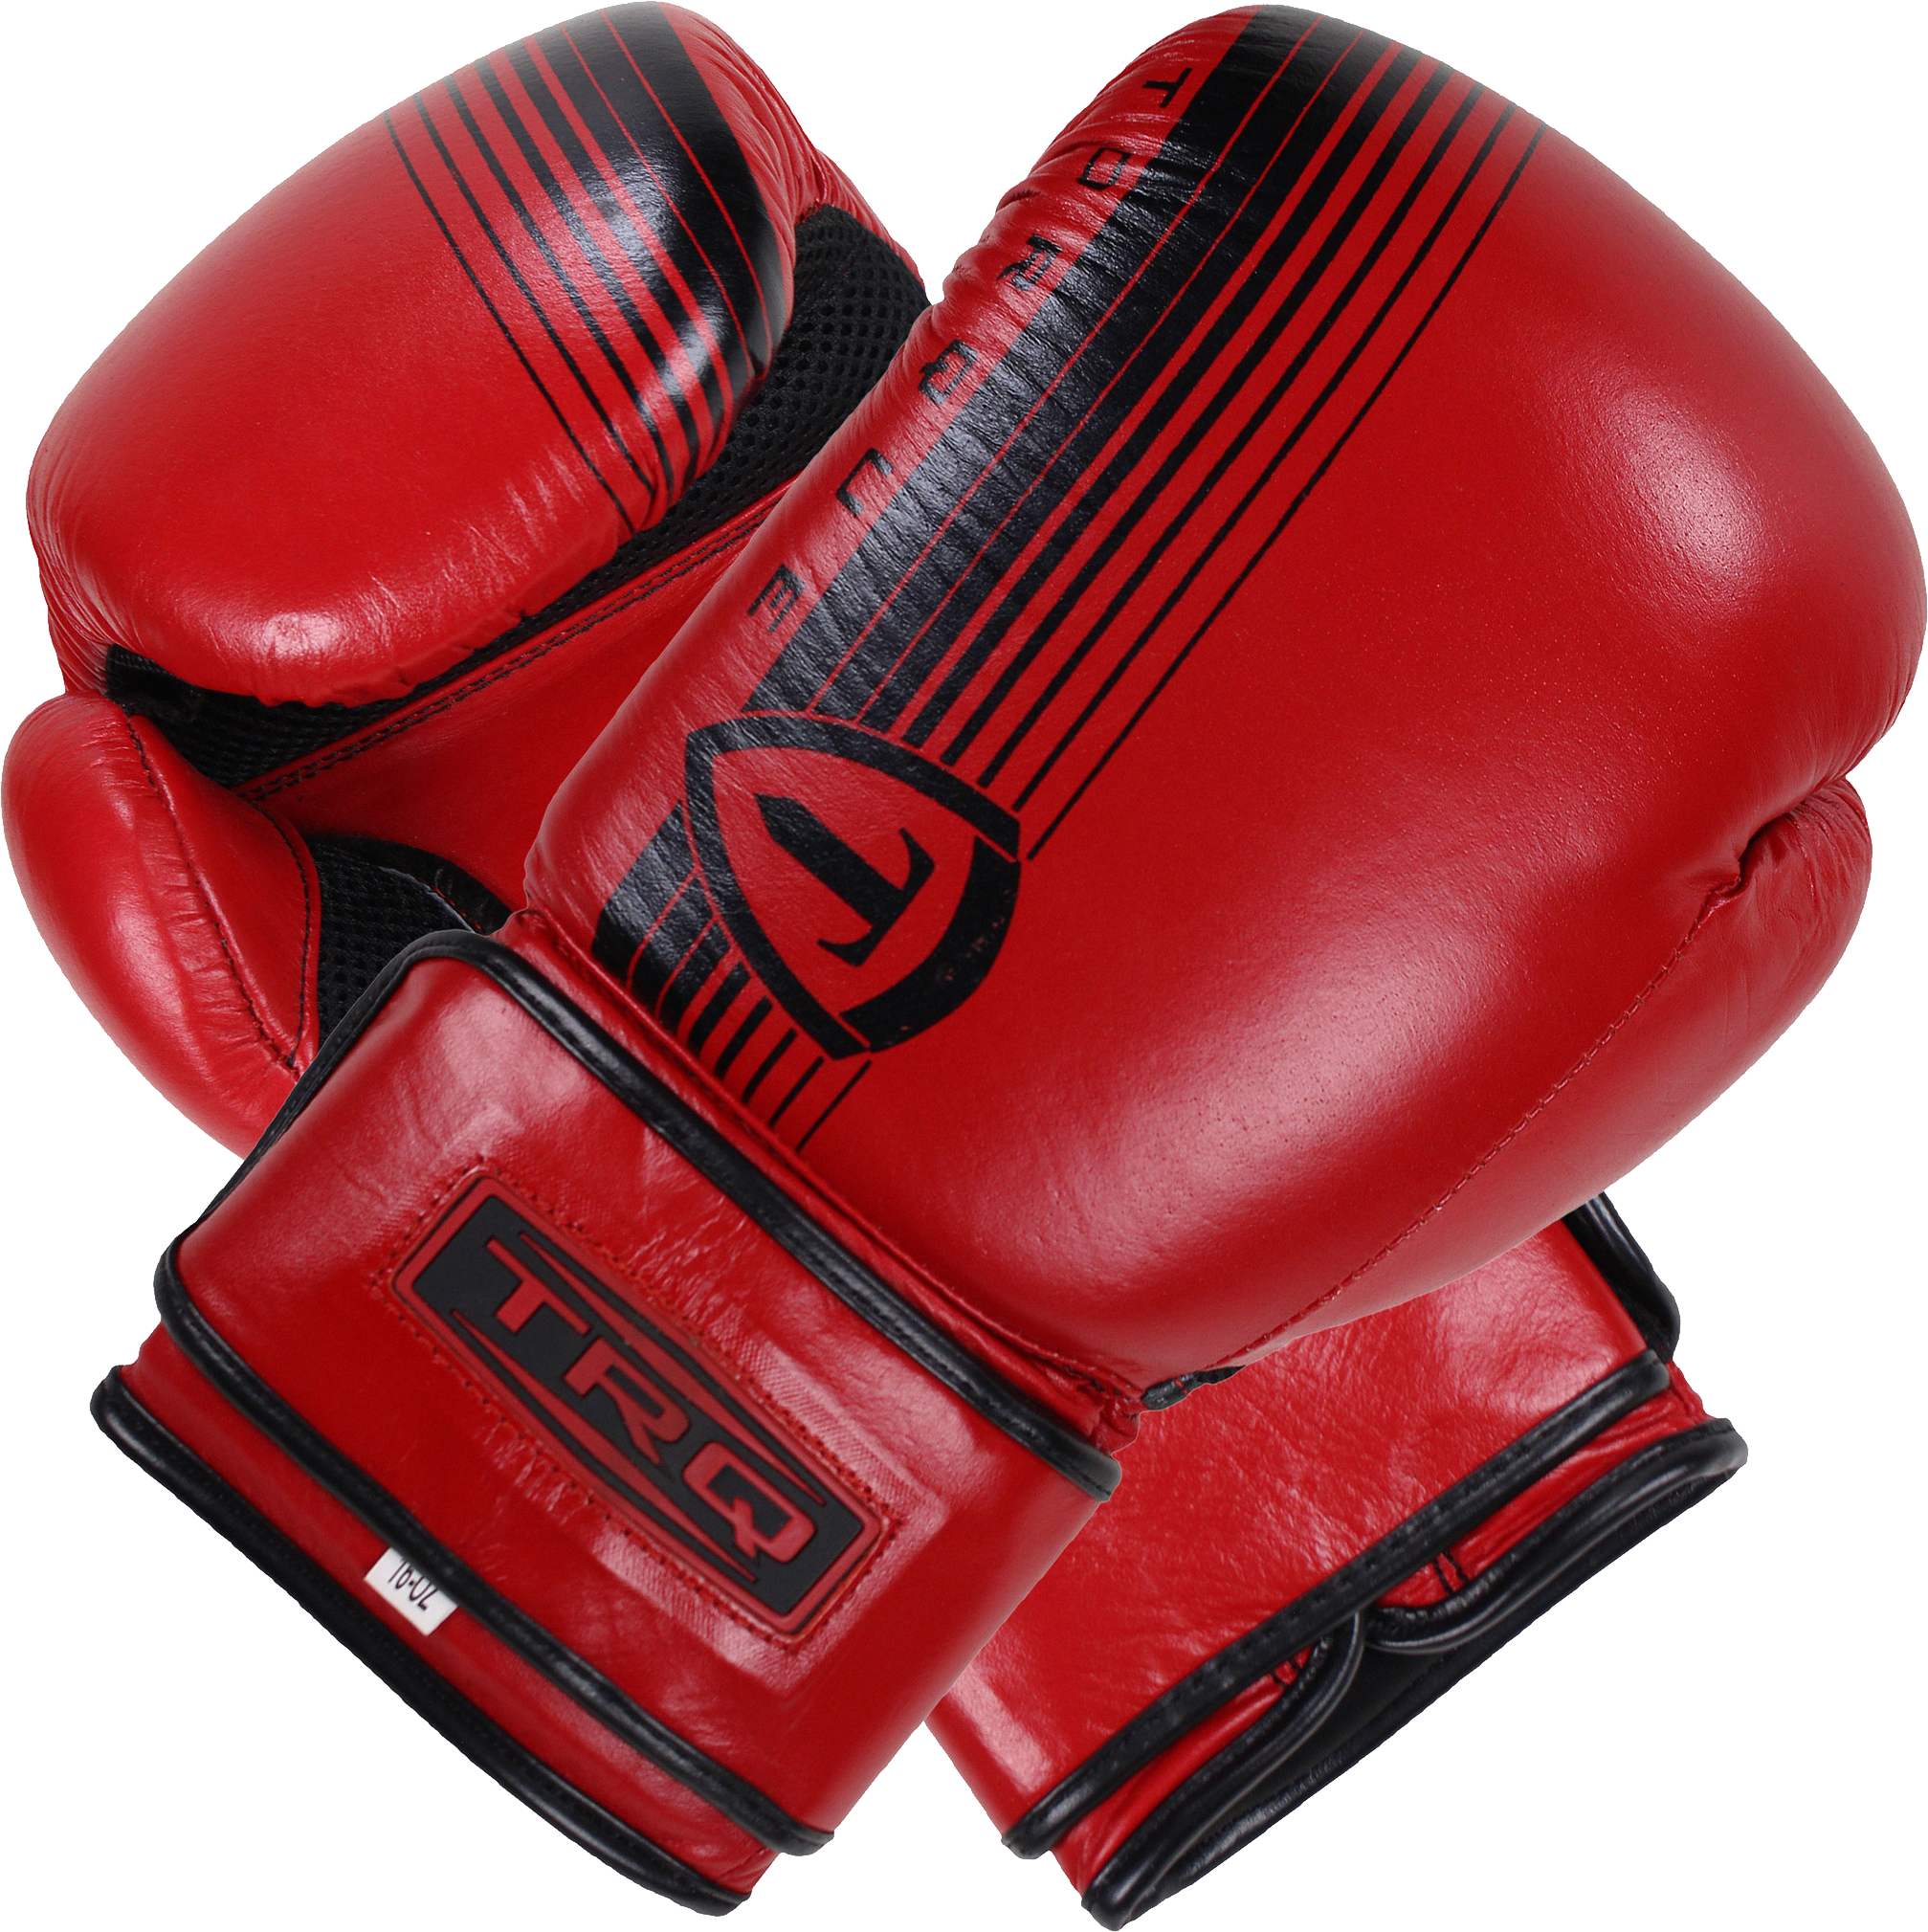 boxing gloves png images are download crazypngm crazy png images download #29215